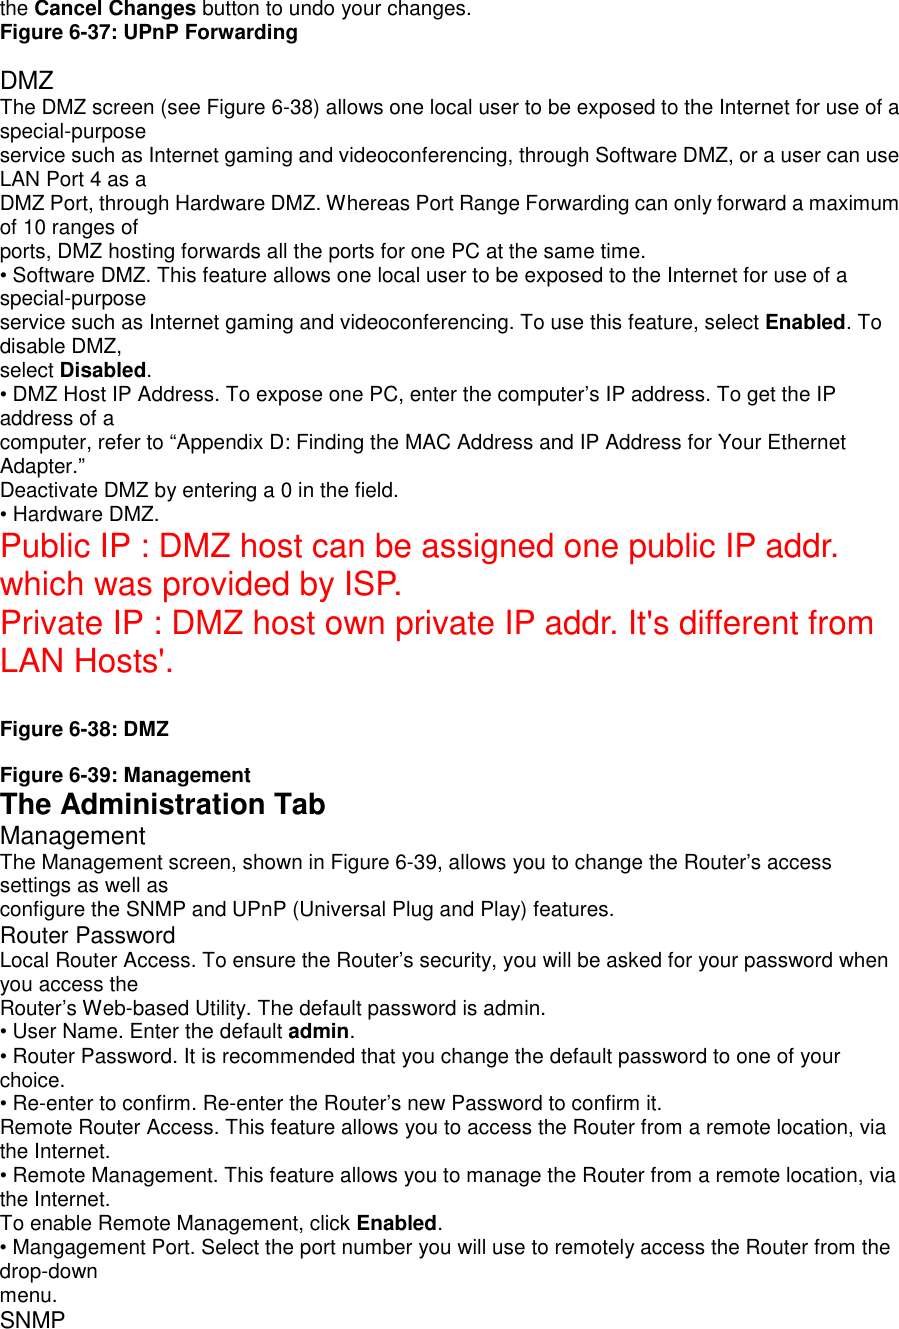 the Cancel Changes button to undo your changes.Figure 6-37: UPnP ForwardingDMZThe DMZ screen (see Figure 6-38) allows one local user to be exposed to the Internet for use of aspecial-purposeservice such as Internet gaming and videoconferencing, through Software DMZ, or a user can useLAN Port 4 as aDMZ Port, through Hardware DMZ. Whereas Port Range Forwarding can only forward a maximumof 10 ranges ofports, DMZ hosting forwards all the ports for one PC at the same time.• Software DMZ. This feature allows one local user to be exposed to the Internet for use of aspecial-purposeservice such as Internet gaming and videoconferencing. To use this feature, select Enabled. Todisable DMZ,select Disabled.• DMZ Host IP Address. To expose one PC, enter the computer’s IP address. To get the IPaddress of acomputer, refer to “Appendix D: Finding the MAC Address and IP Address for Your EthernetAdapter.”Deactivate DMZ by entering a 0 in the field.• Hardware DMZ.Public IP : DMZ host can be assigned one public IP addr.which was provided by ISP.Private IP : DMZ host own private IP addr. It&apos;s different fromLAN Hosts&apos;.Figure 6-38: DMZFigure 6-39: ManagementThe Administration TabManagementThe Management screen, shown in Figure 6-39, allows you to change the Router’s accesssettings as well asconfigure the SNMP and UPnP (Universal Plug and Play) features.Router PasswordLocal Router Access. To ensure the Router’s security, you will be asked for your password whenyou access theRouter’s Web-based Utility. The default password is admin.• User Name. Enter the default admin.• Router Password. It is recommended that you change the default password to one of yourchoice.• Re-enter to confirm. Re-enter the Router’s new Password to confirm it.Remote Router Access. This feature allows you to access the Router from a remote location, viathe Internet.• Remote Management. This feature allows you to manage the Router from a remote location, viathe Internet.To enable Remote Management, click Enabled.• Mangagement Port. Select the port number you will use to remotely access the Router from thedrop-downmenu.SNMP